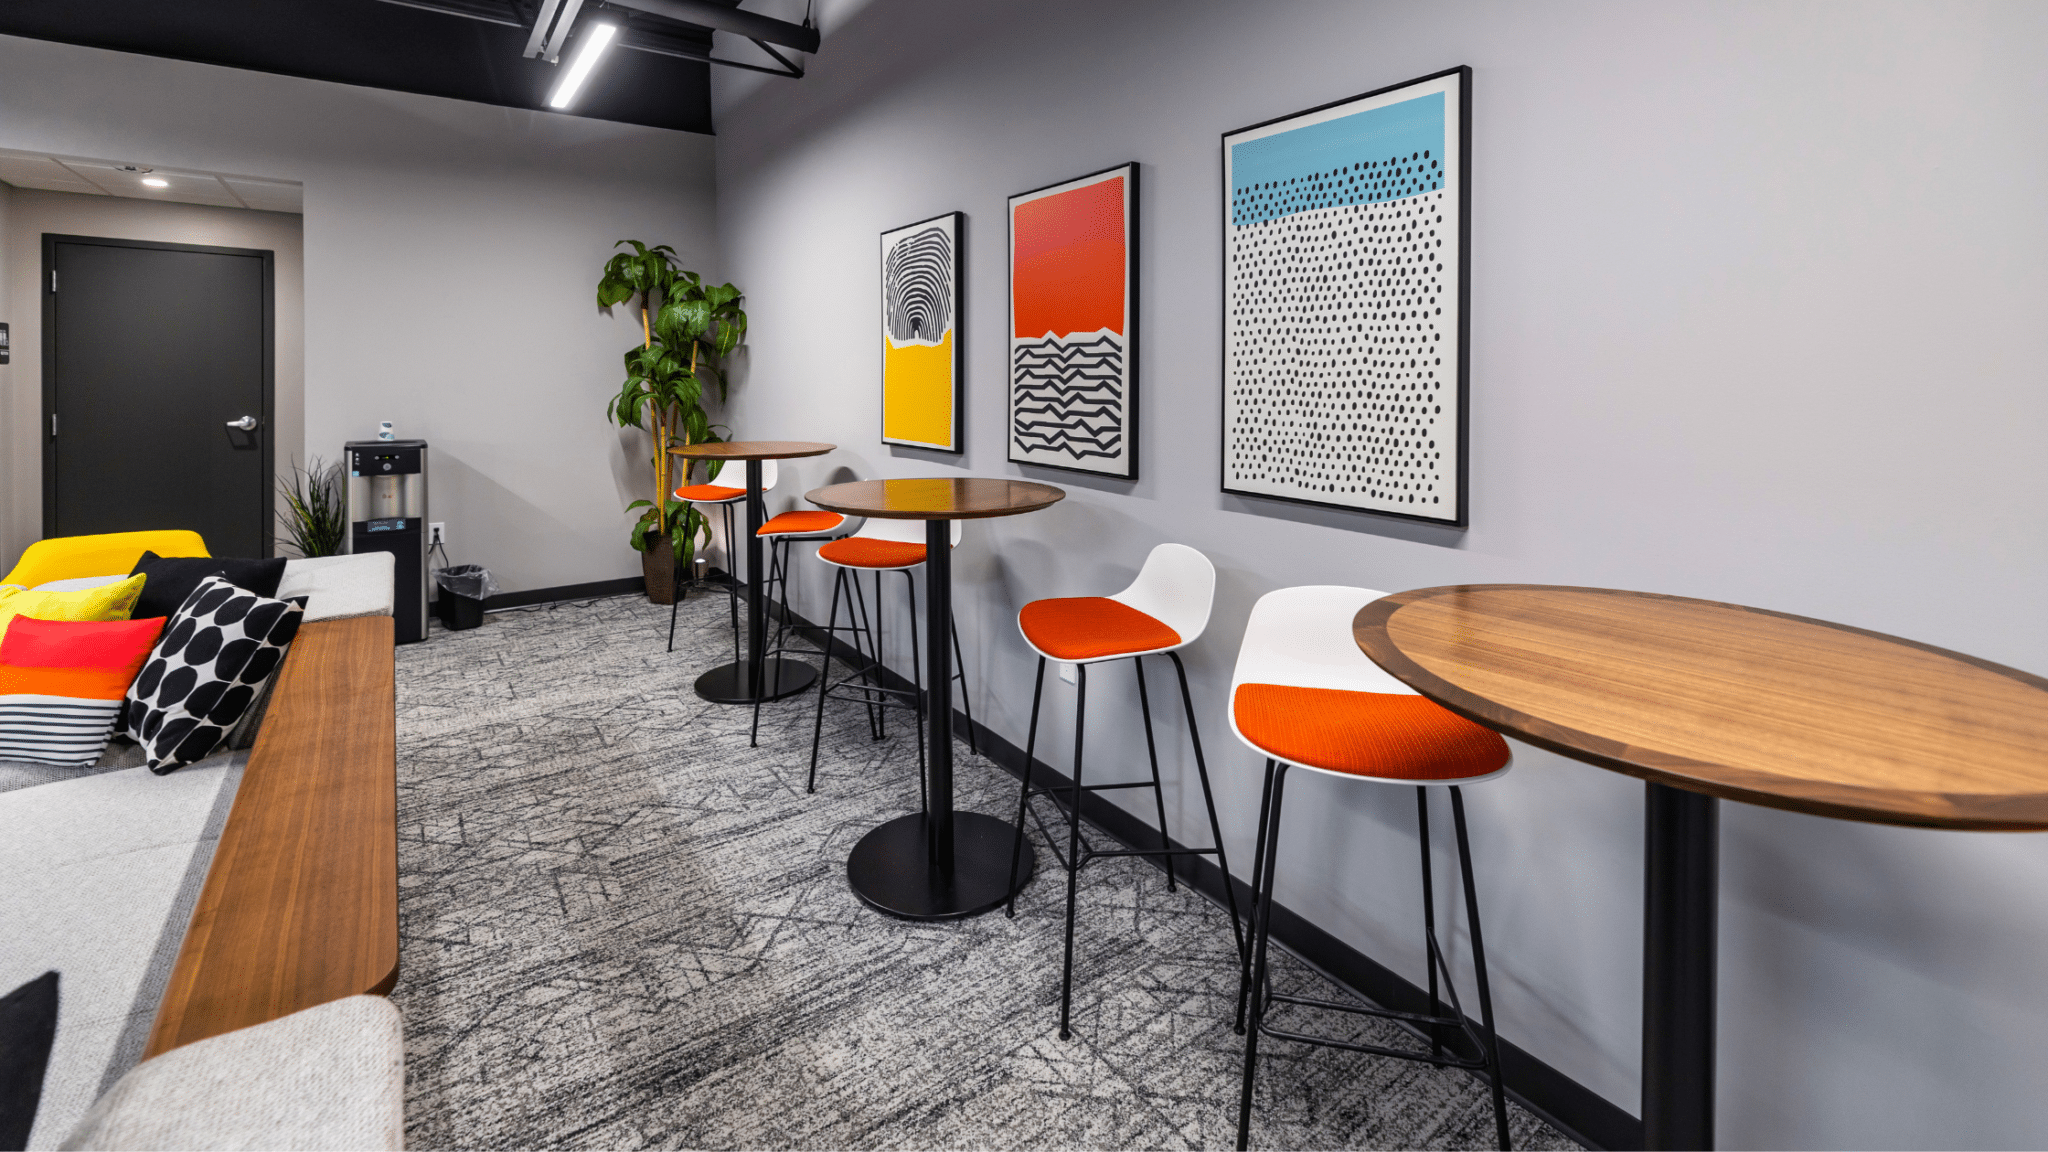 The interior of a commercial space featuring bright, colored art and wood tones to depict interior design trends of 2023.